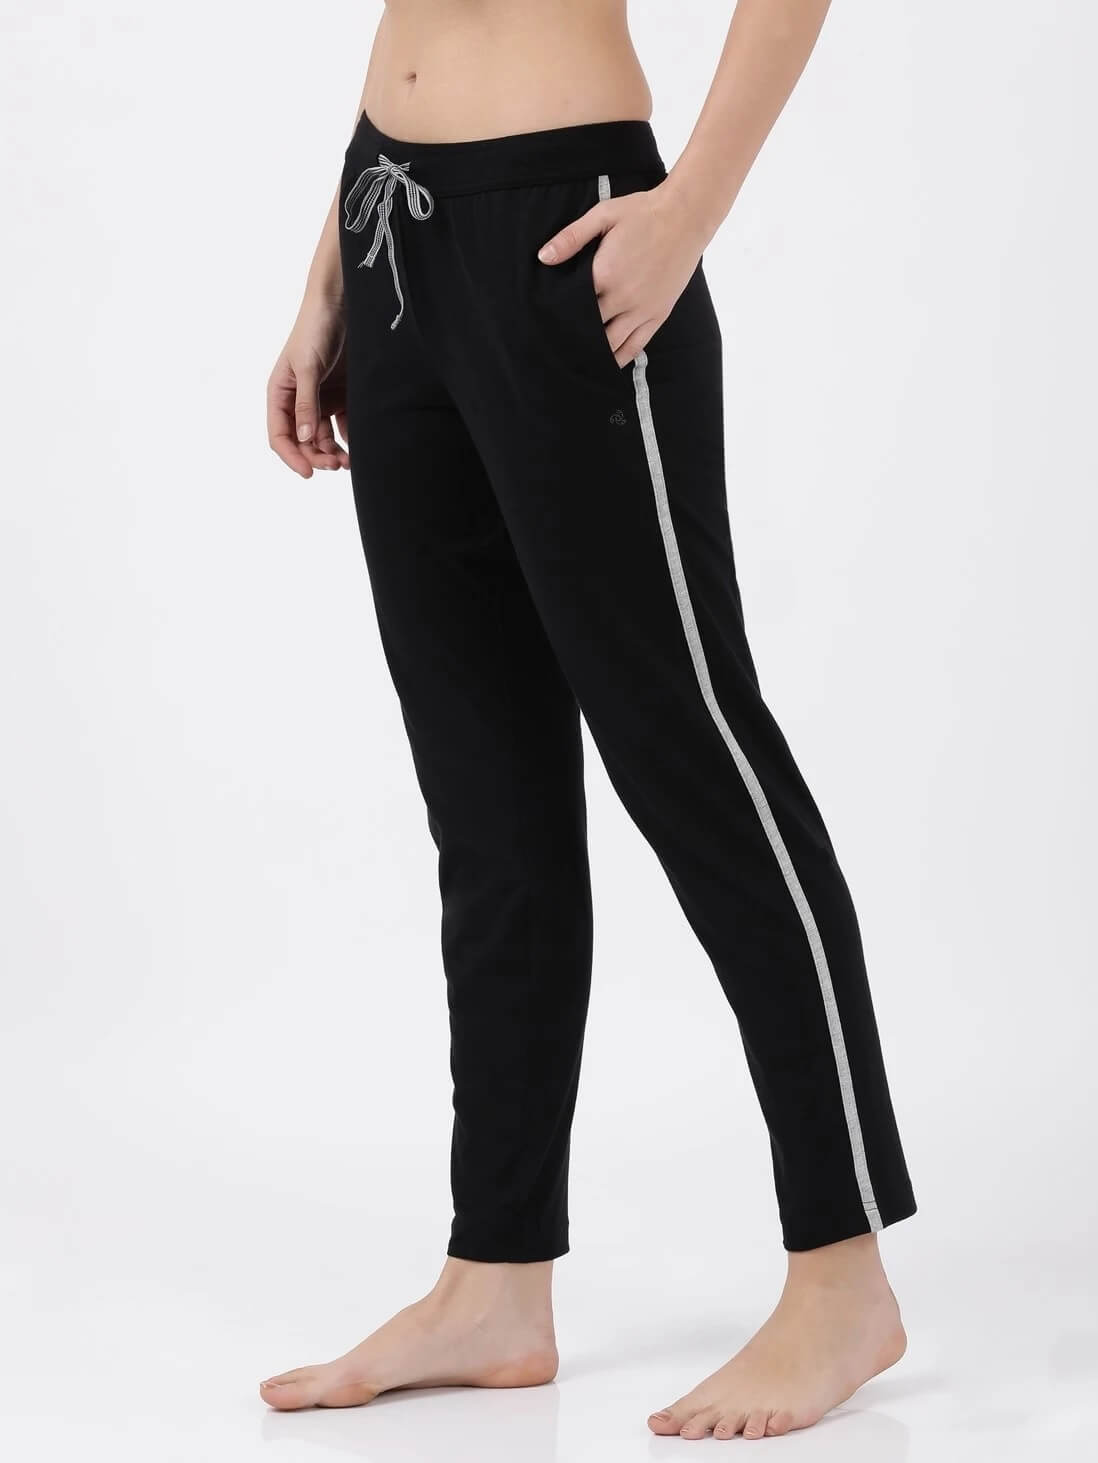 Horse Riding Pants For Sale In Australia